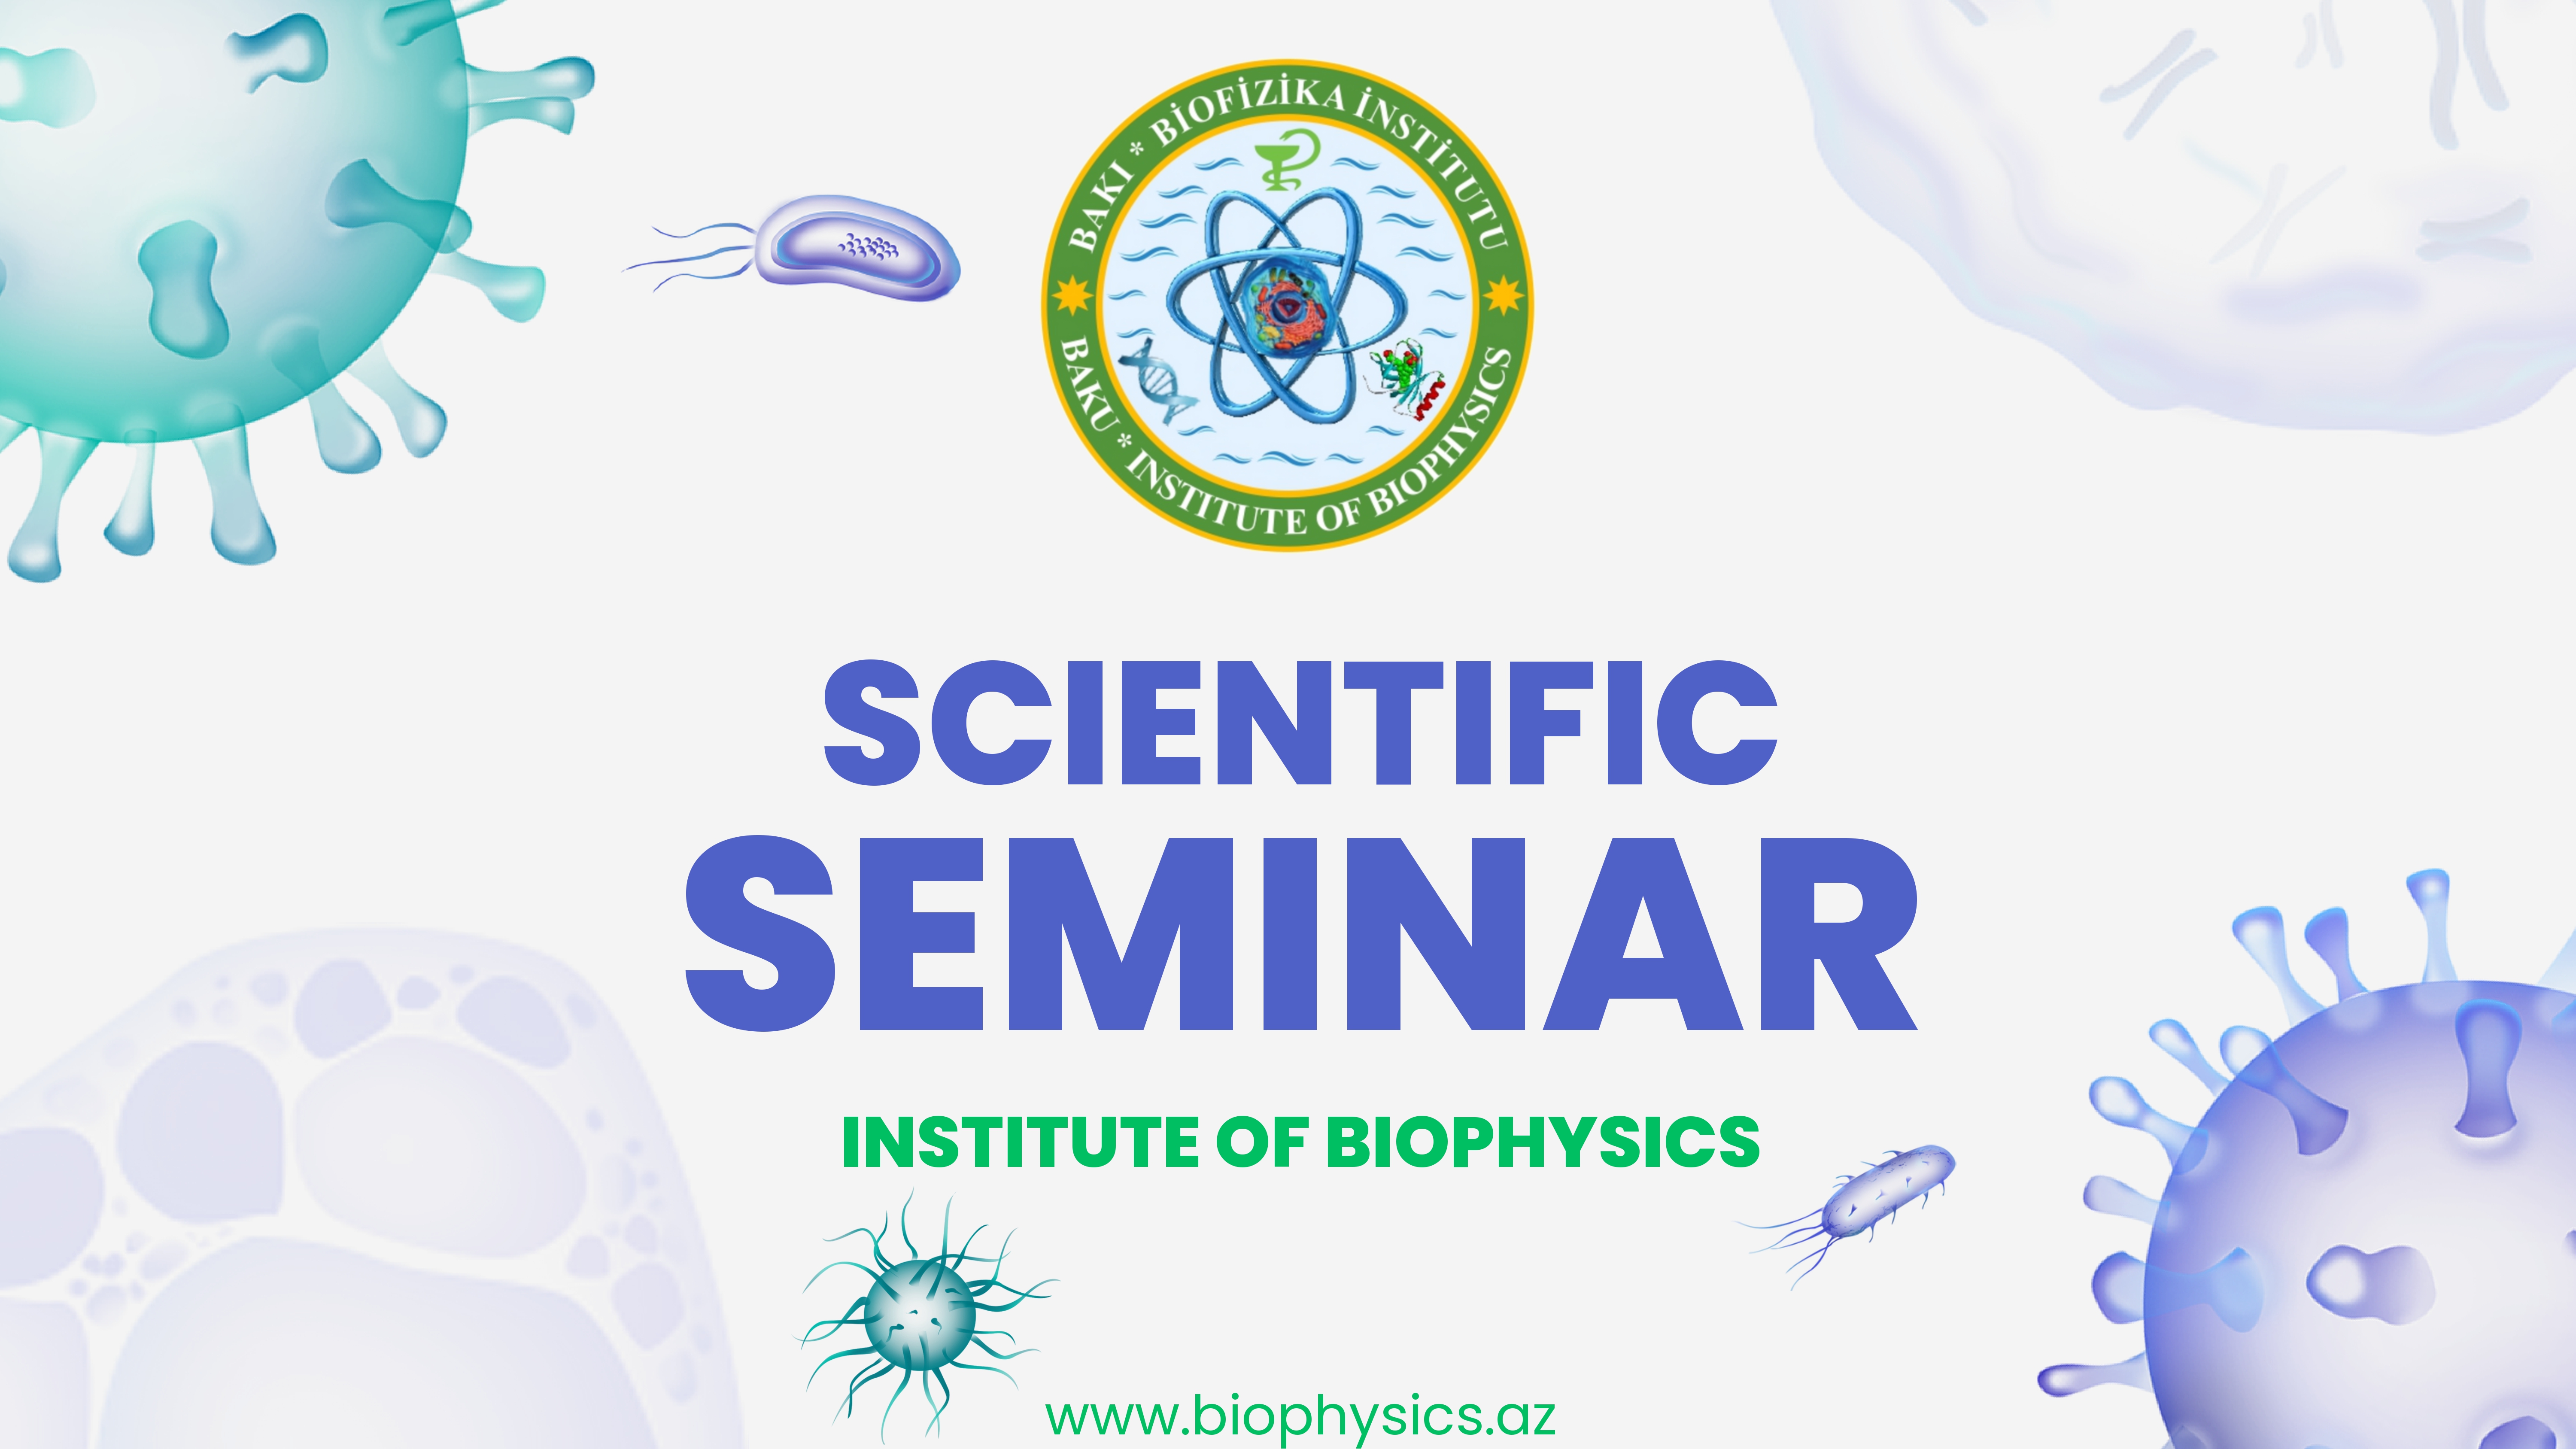 A scientific seminar on "Bioelectric signals: functions and pathophysiology" will be held at the Institute of Biophysics